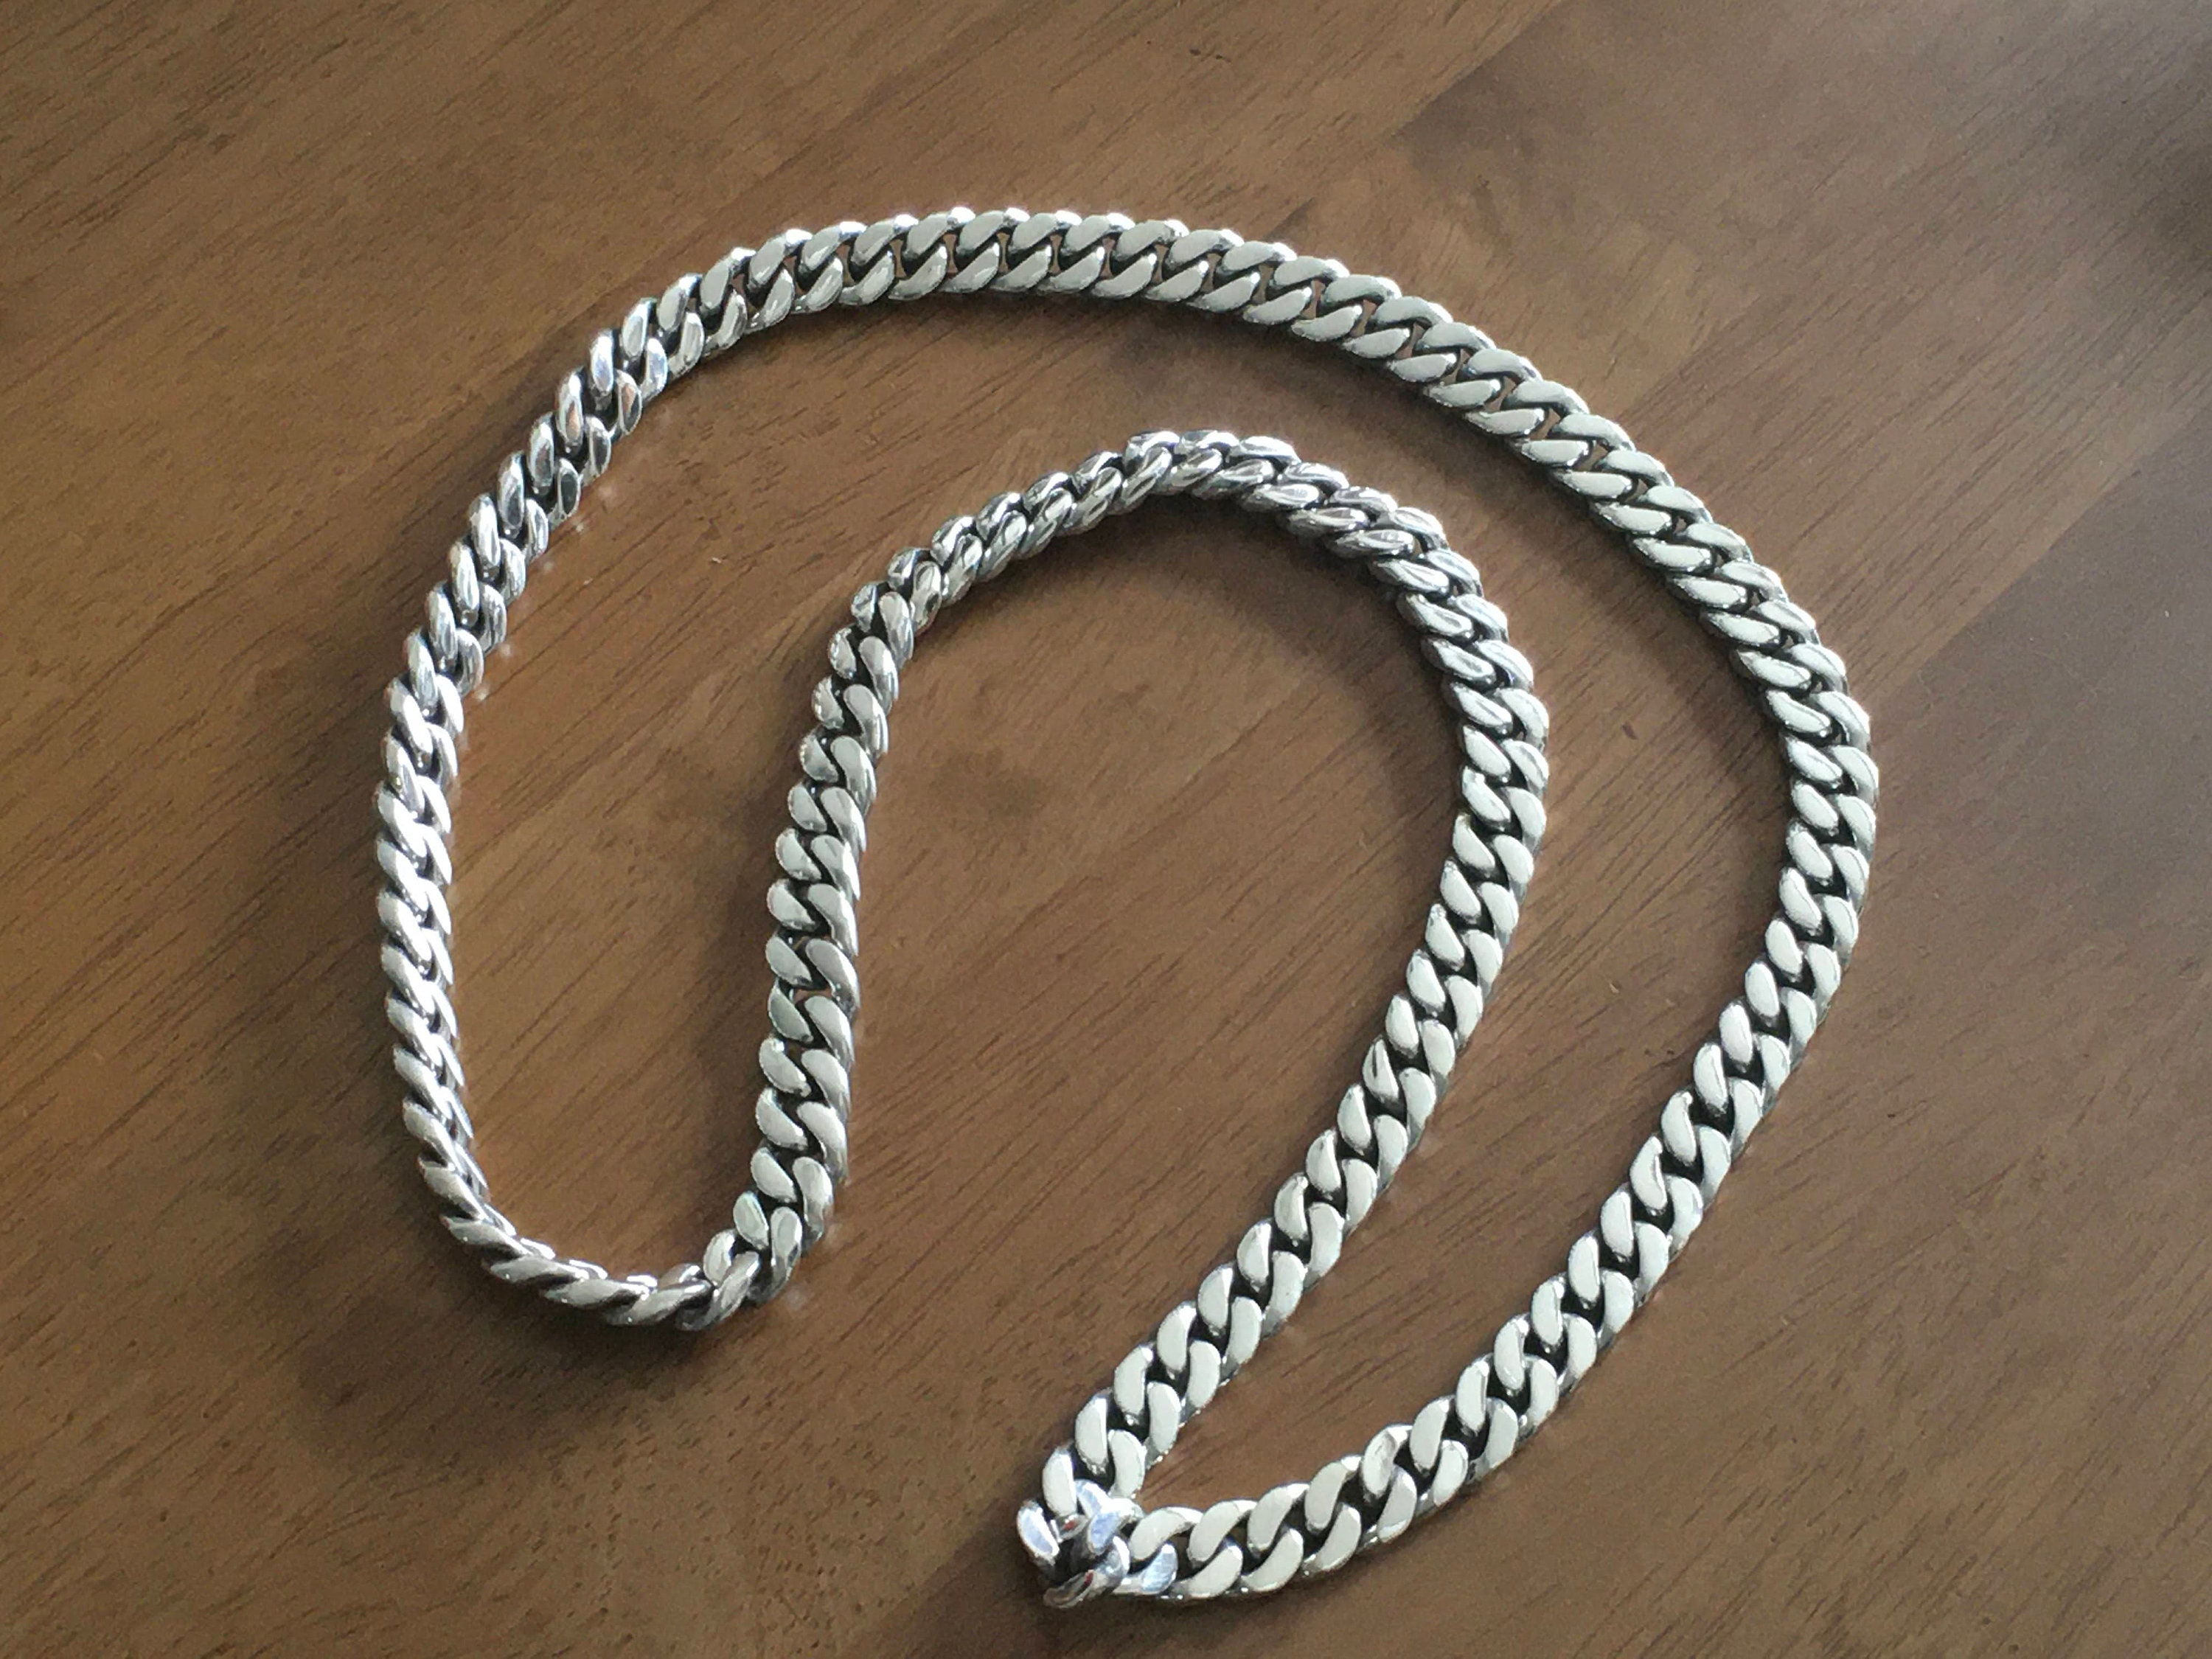 Chain Link Bracelet – The Shoppe at Coldwater